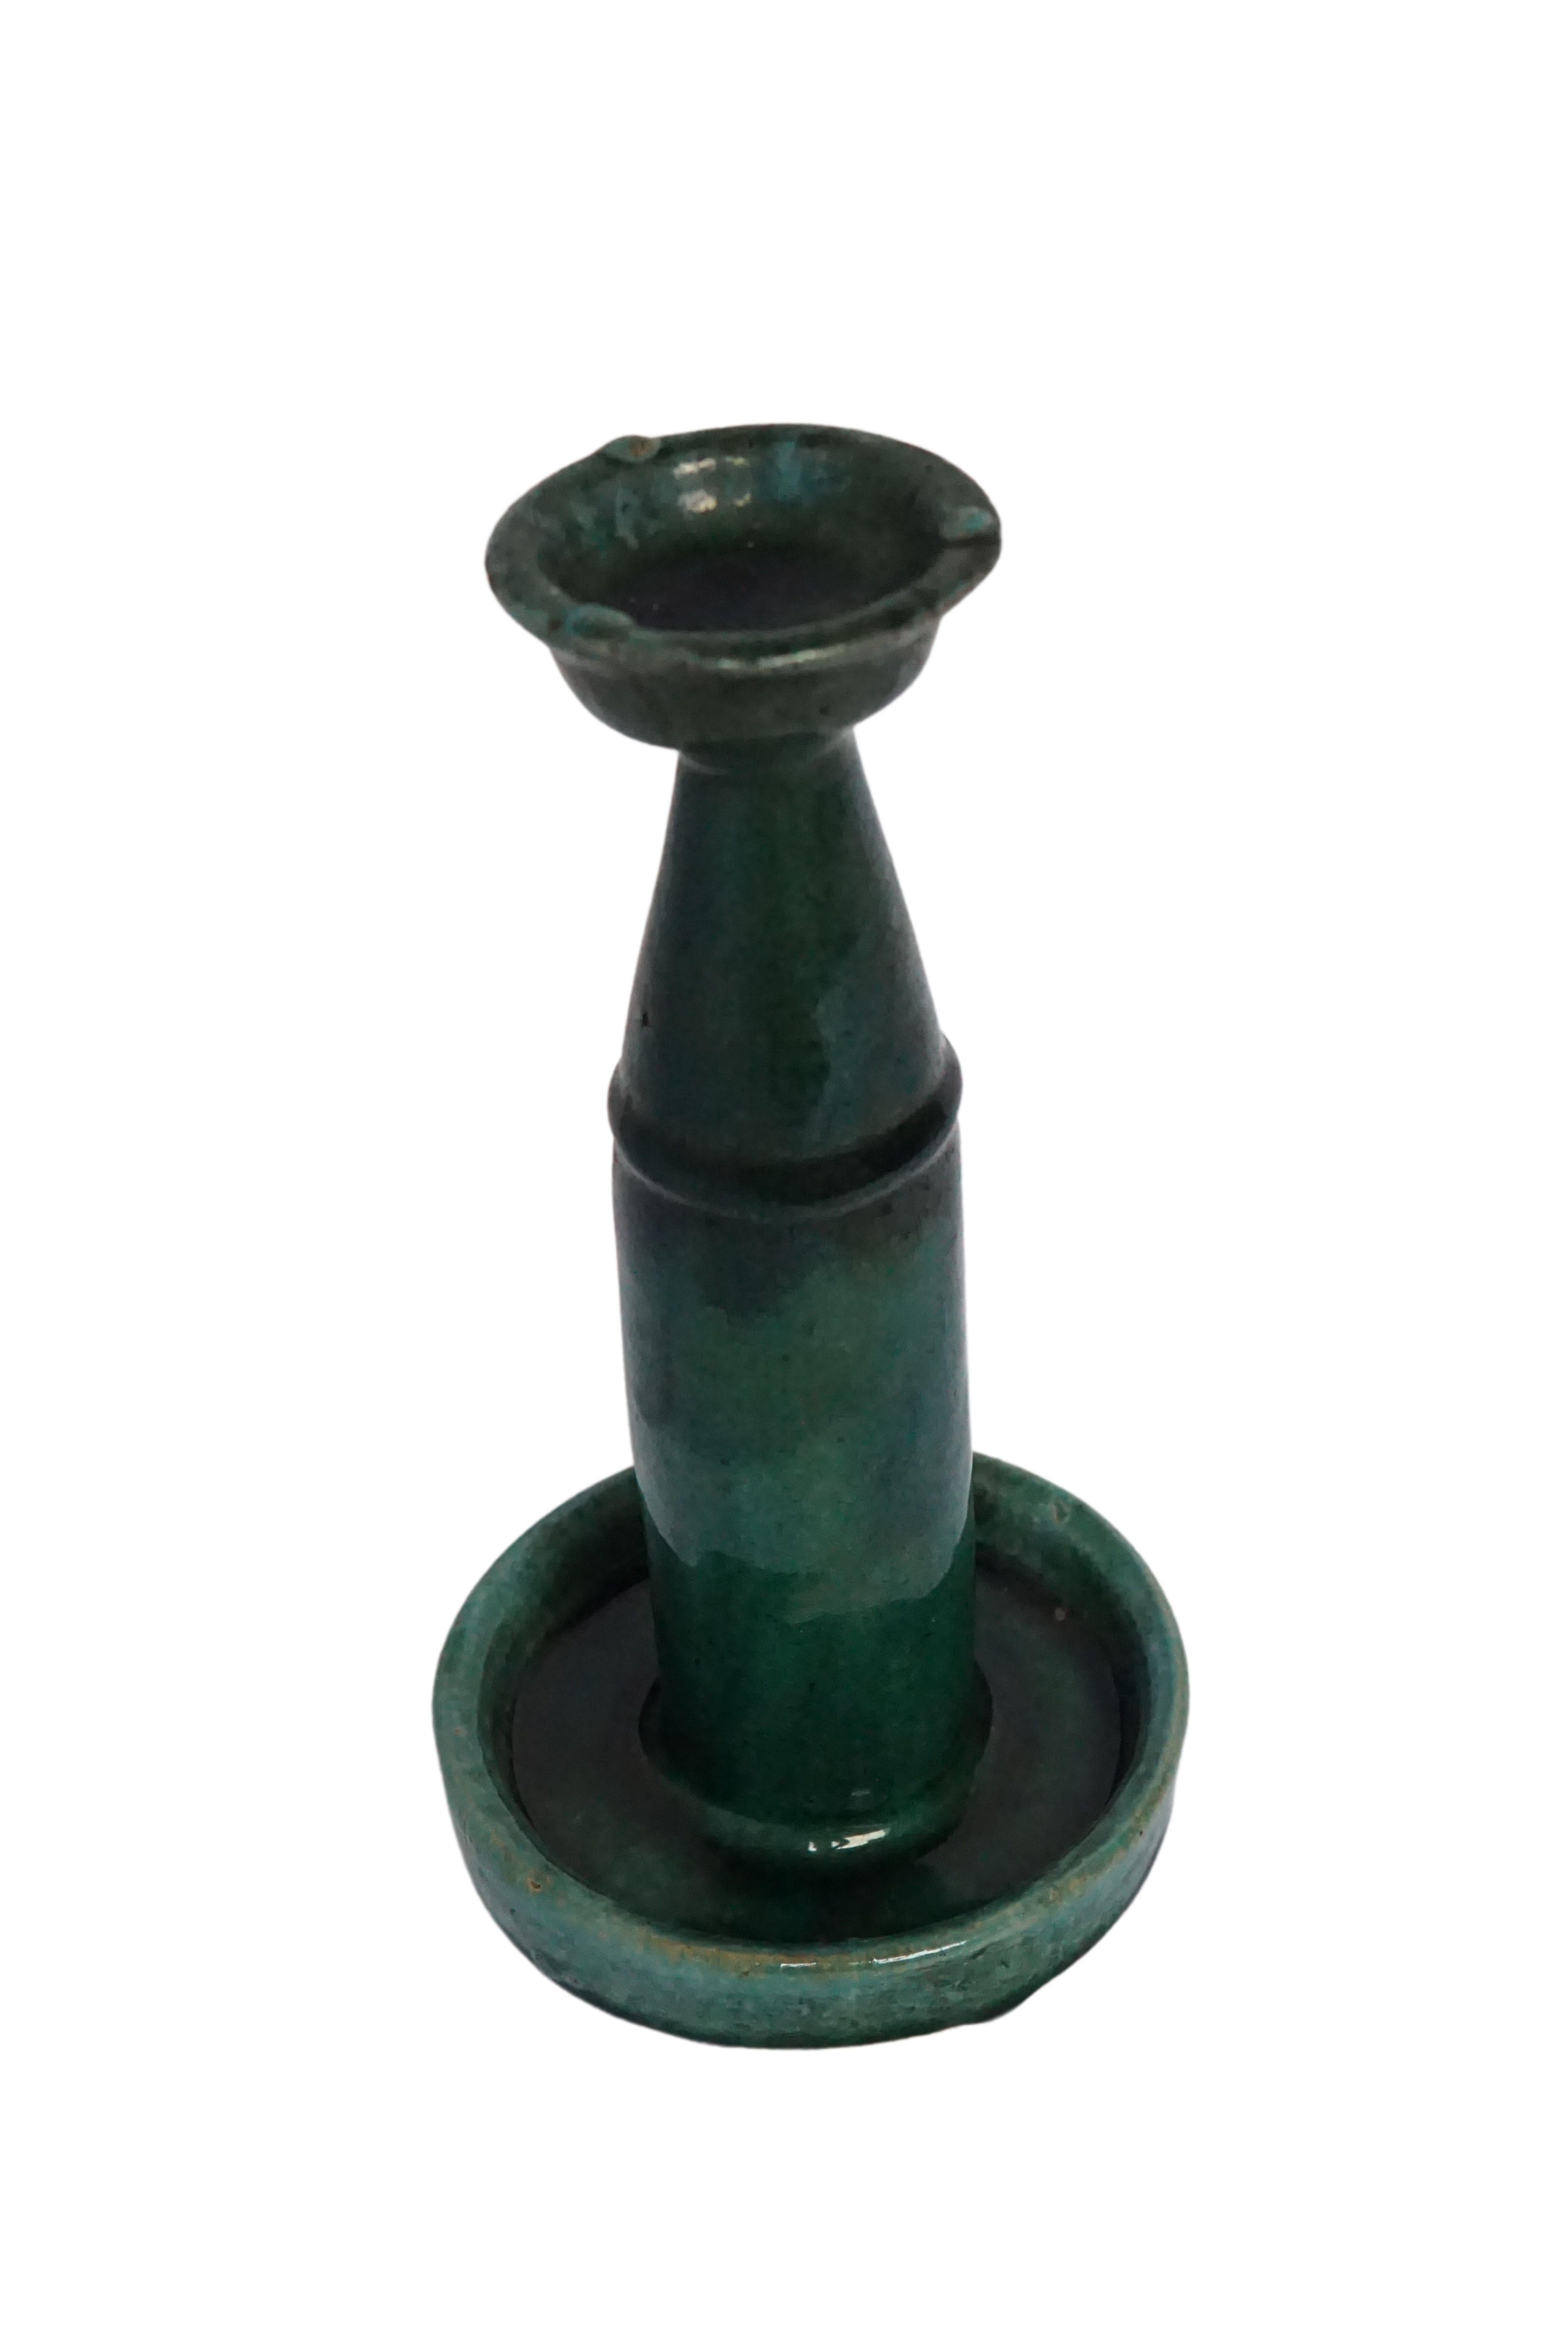 Chinoiserie Chinese Ceramic 'Shiwan' Oil Lamp / Candle Holder, Green Glaze, c. 1950 For Sale